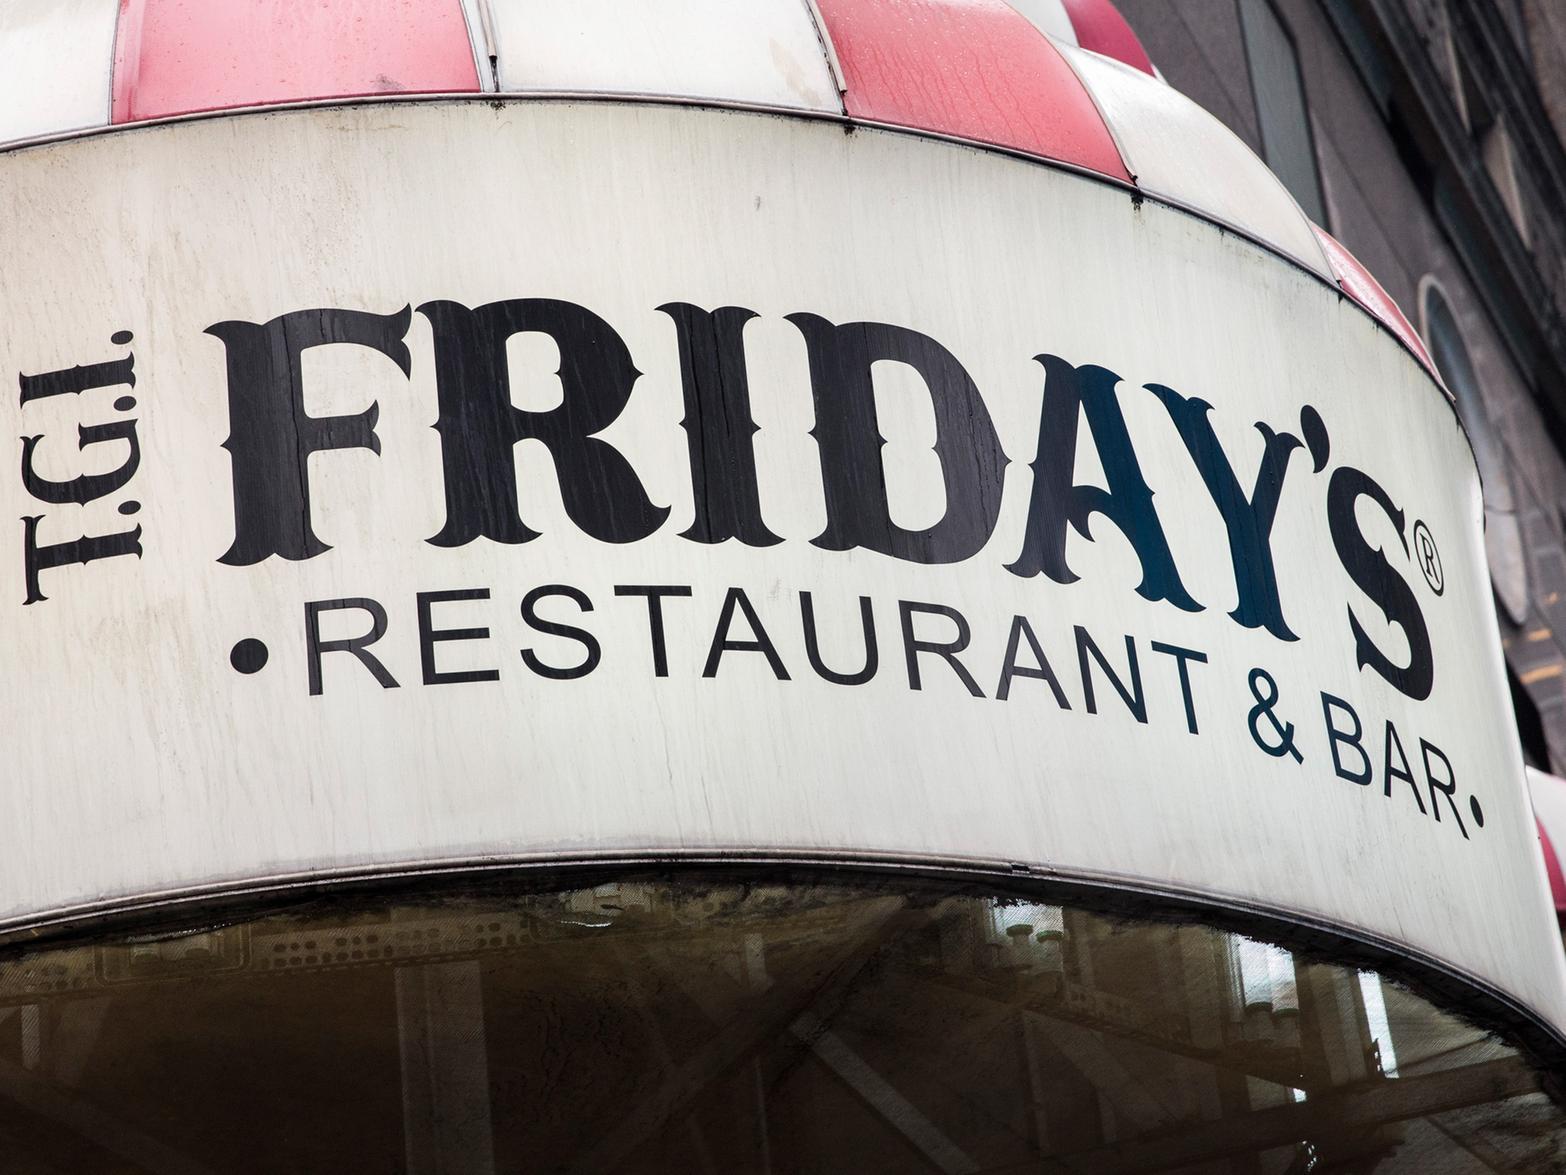 American chain TGI Friday's focus on burgers, ribs, grills and fried chicken, but also have a wide-ranging vegan menu, and plenty of desserts on offer.